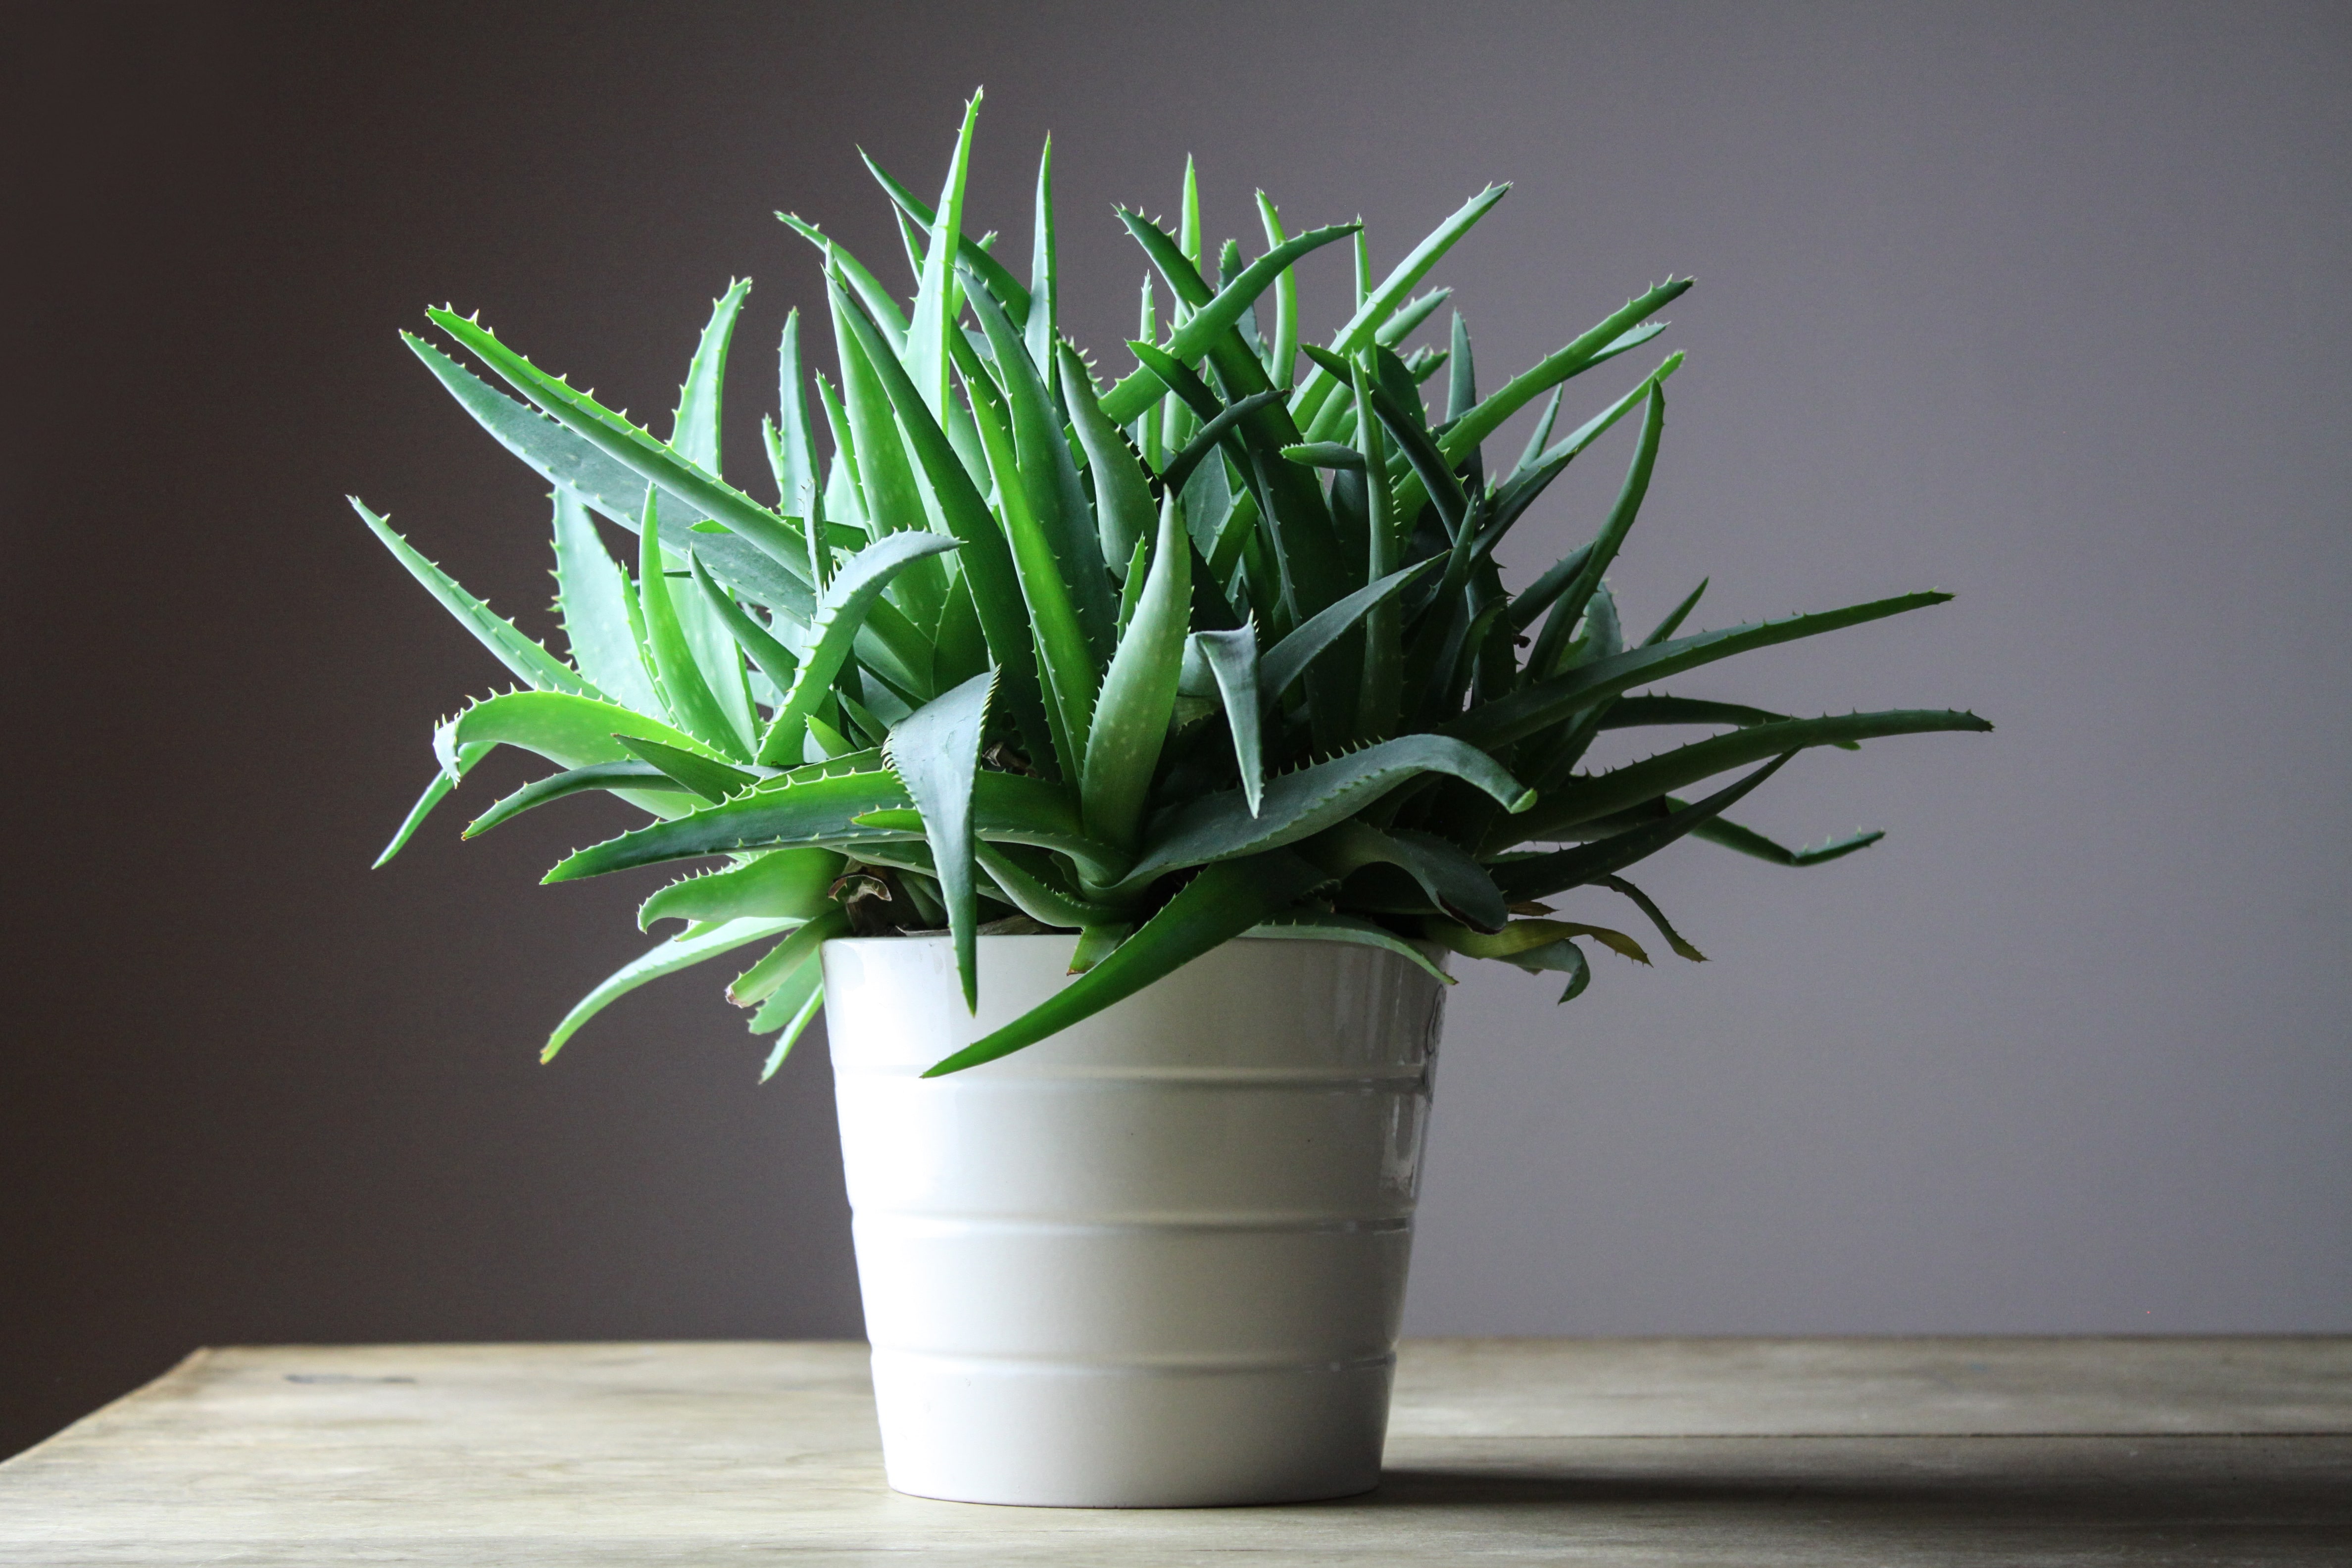 A vibrant green Aloe Vera house plant potted in a simple, white, metal planter and positioned against a deep purple-grey wall indoors